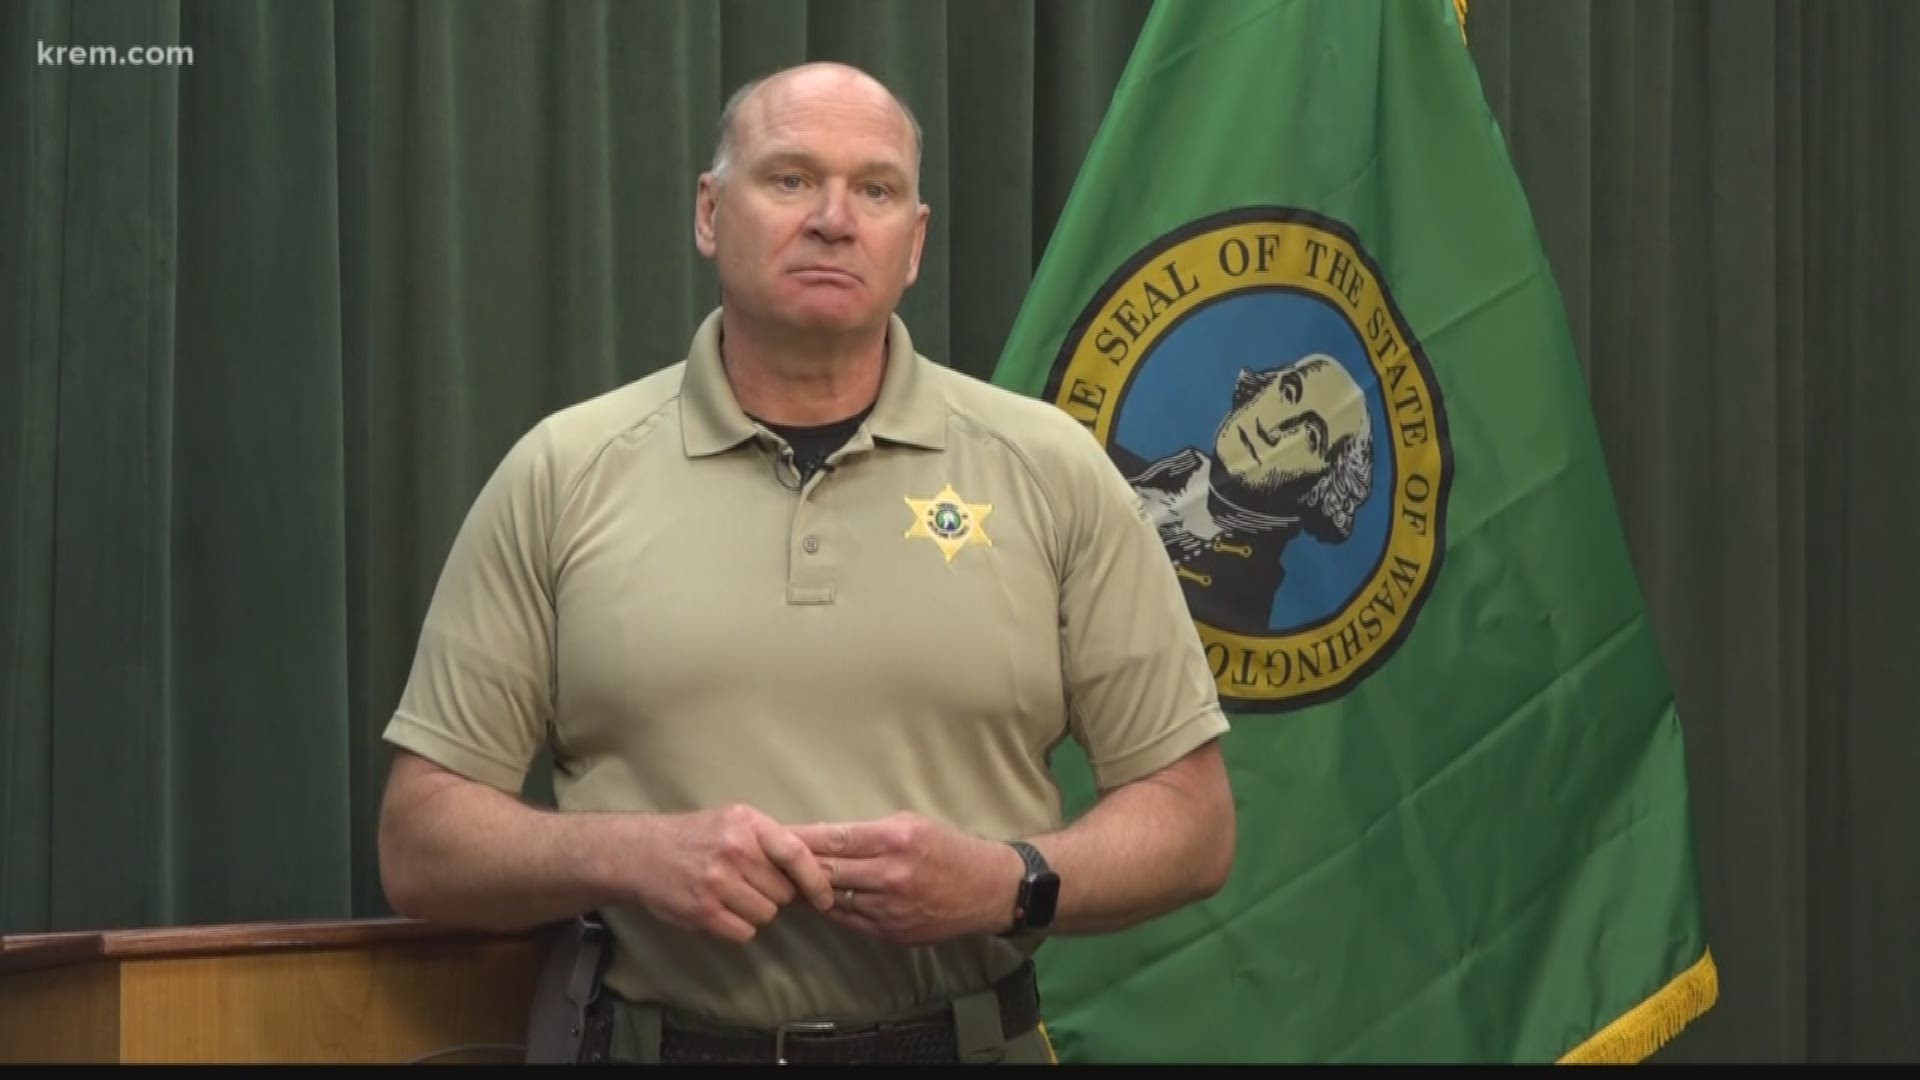 Spokane County Sheriff Ozzie Knezovich told KREM he now wants to hold a public forum about whether deputies should receive a controversial training.